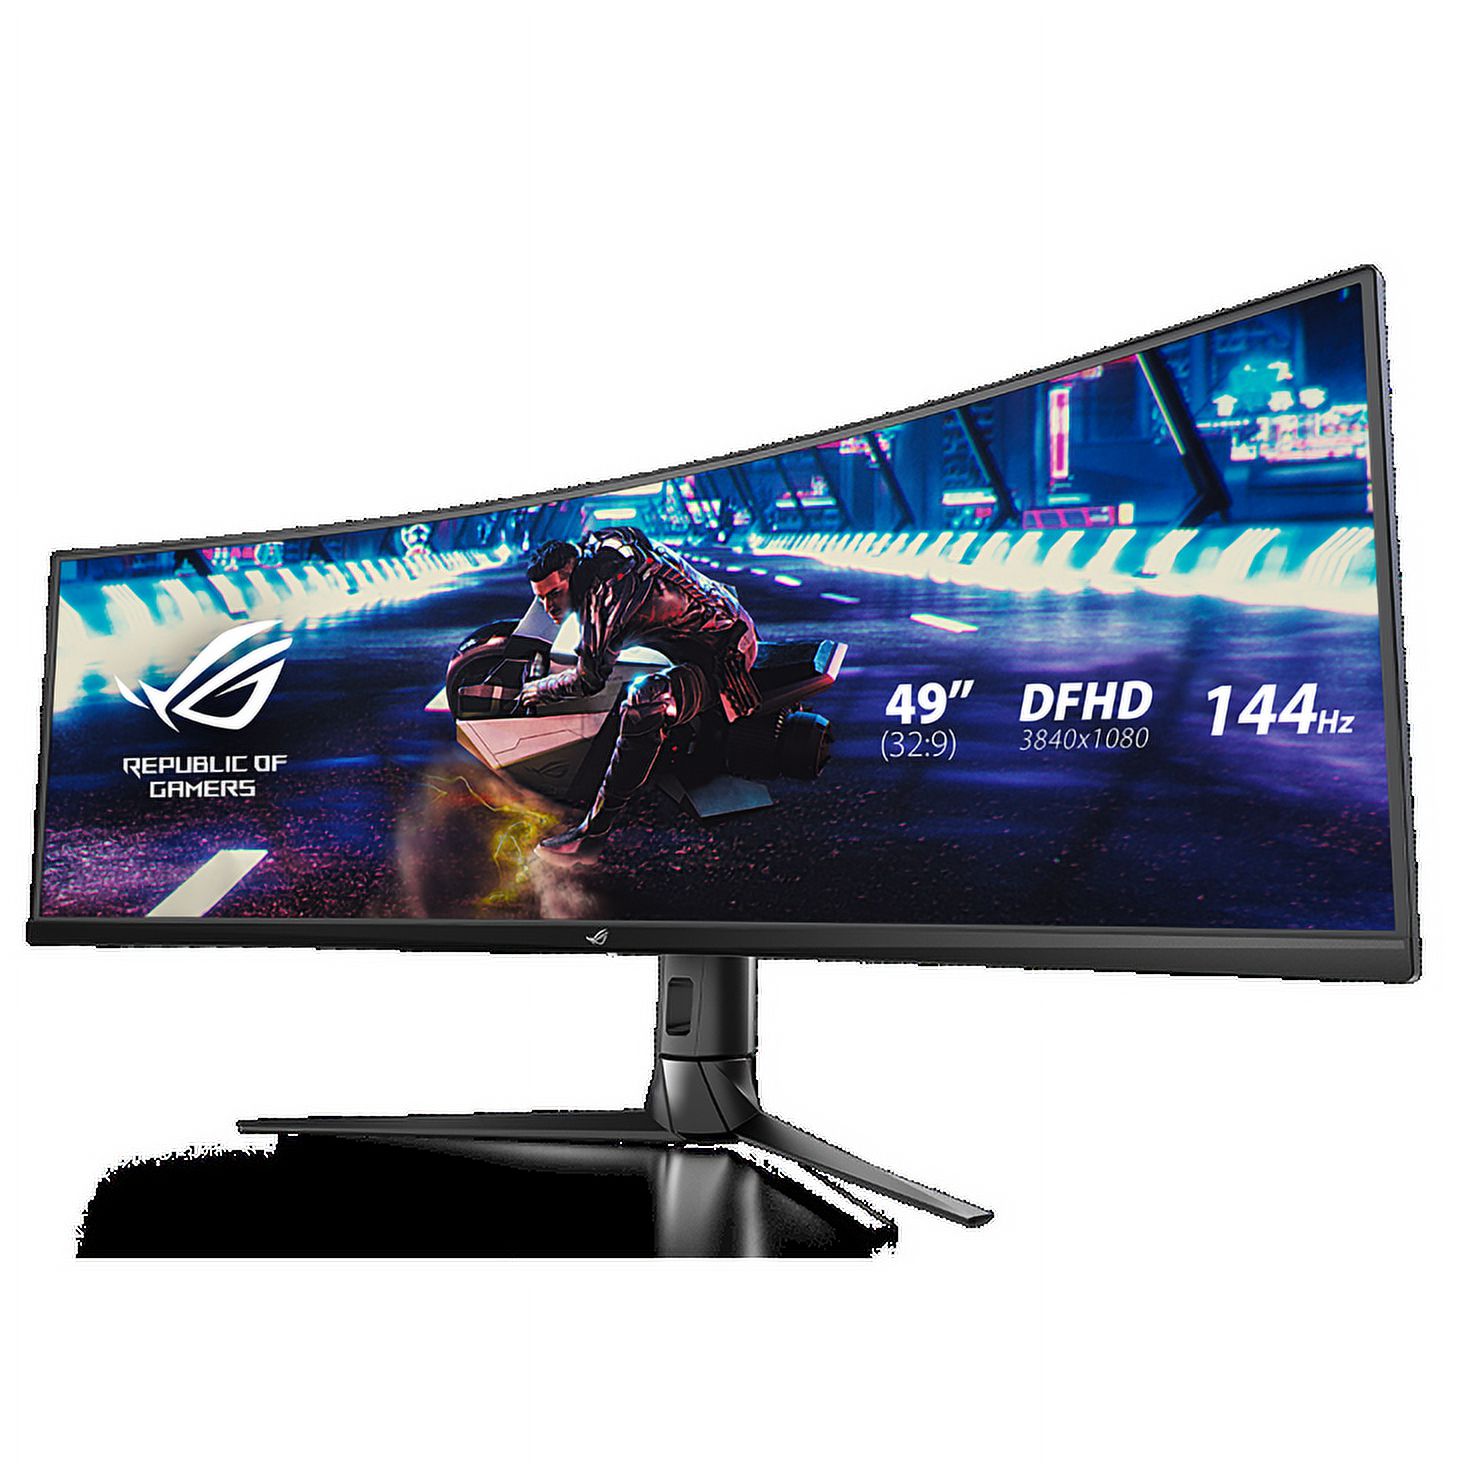 ROG Strix XG49VQ Super Ultra-Wide HDR Gaming Monitor — 49-inch 32:9 (3840 x 1080), 144Hz, FreeSync™ 2 HDR, DisplayHDR™ 400, DCI-P3: 90%, Shadow Boost - image 2 of 3